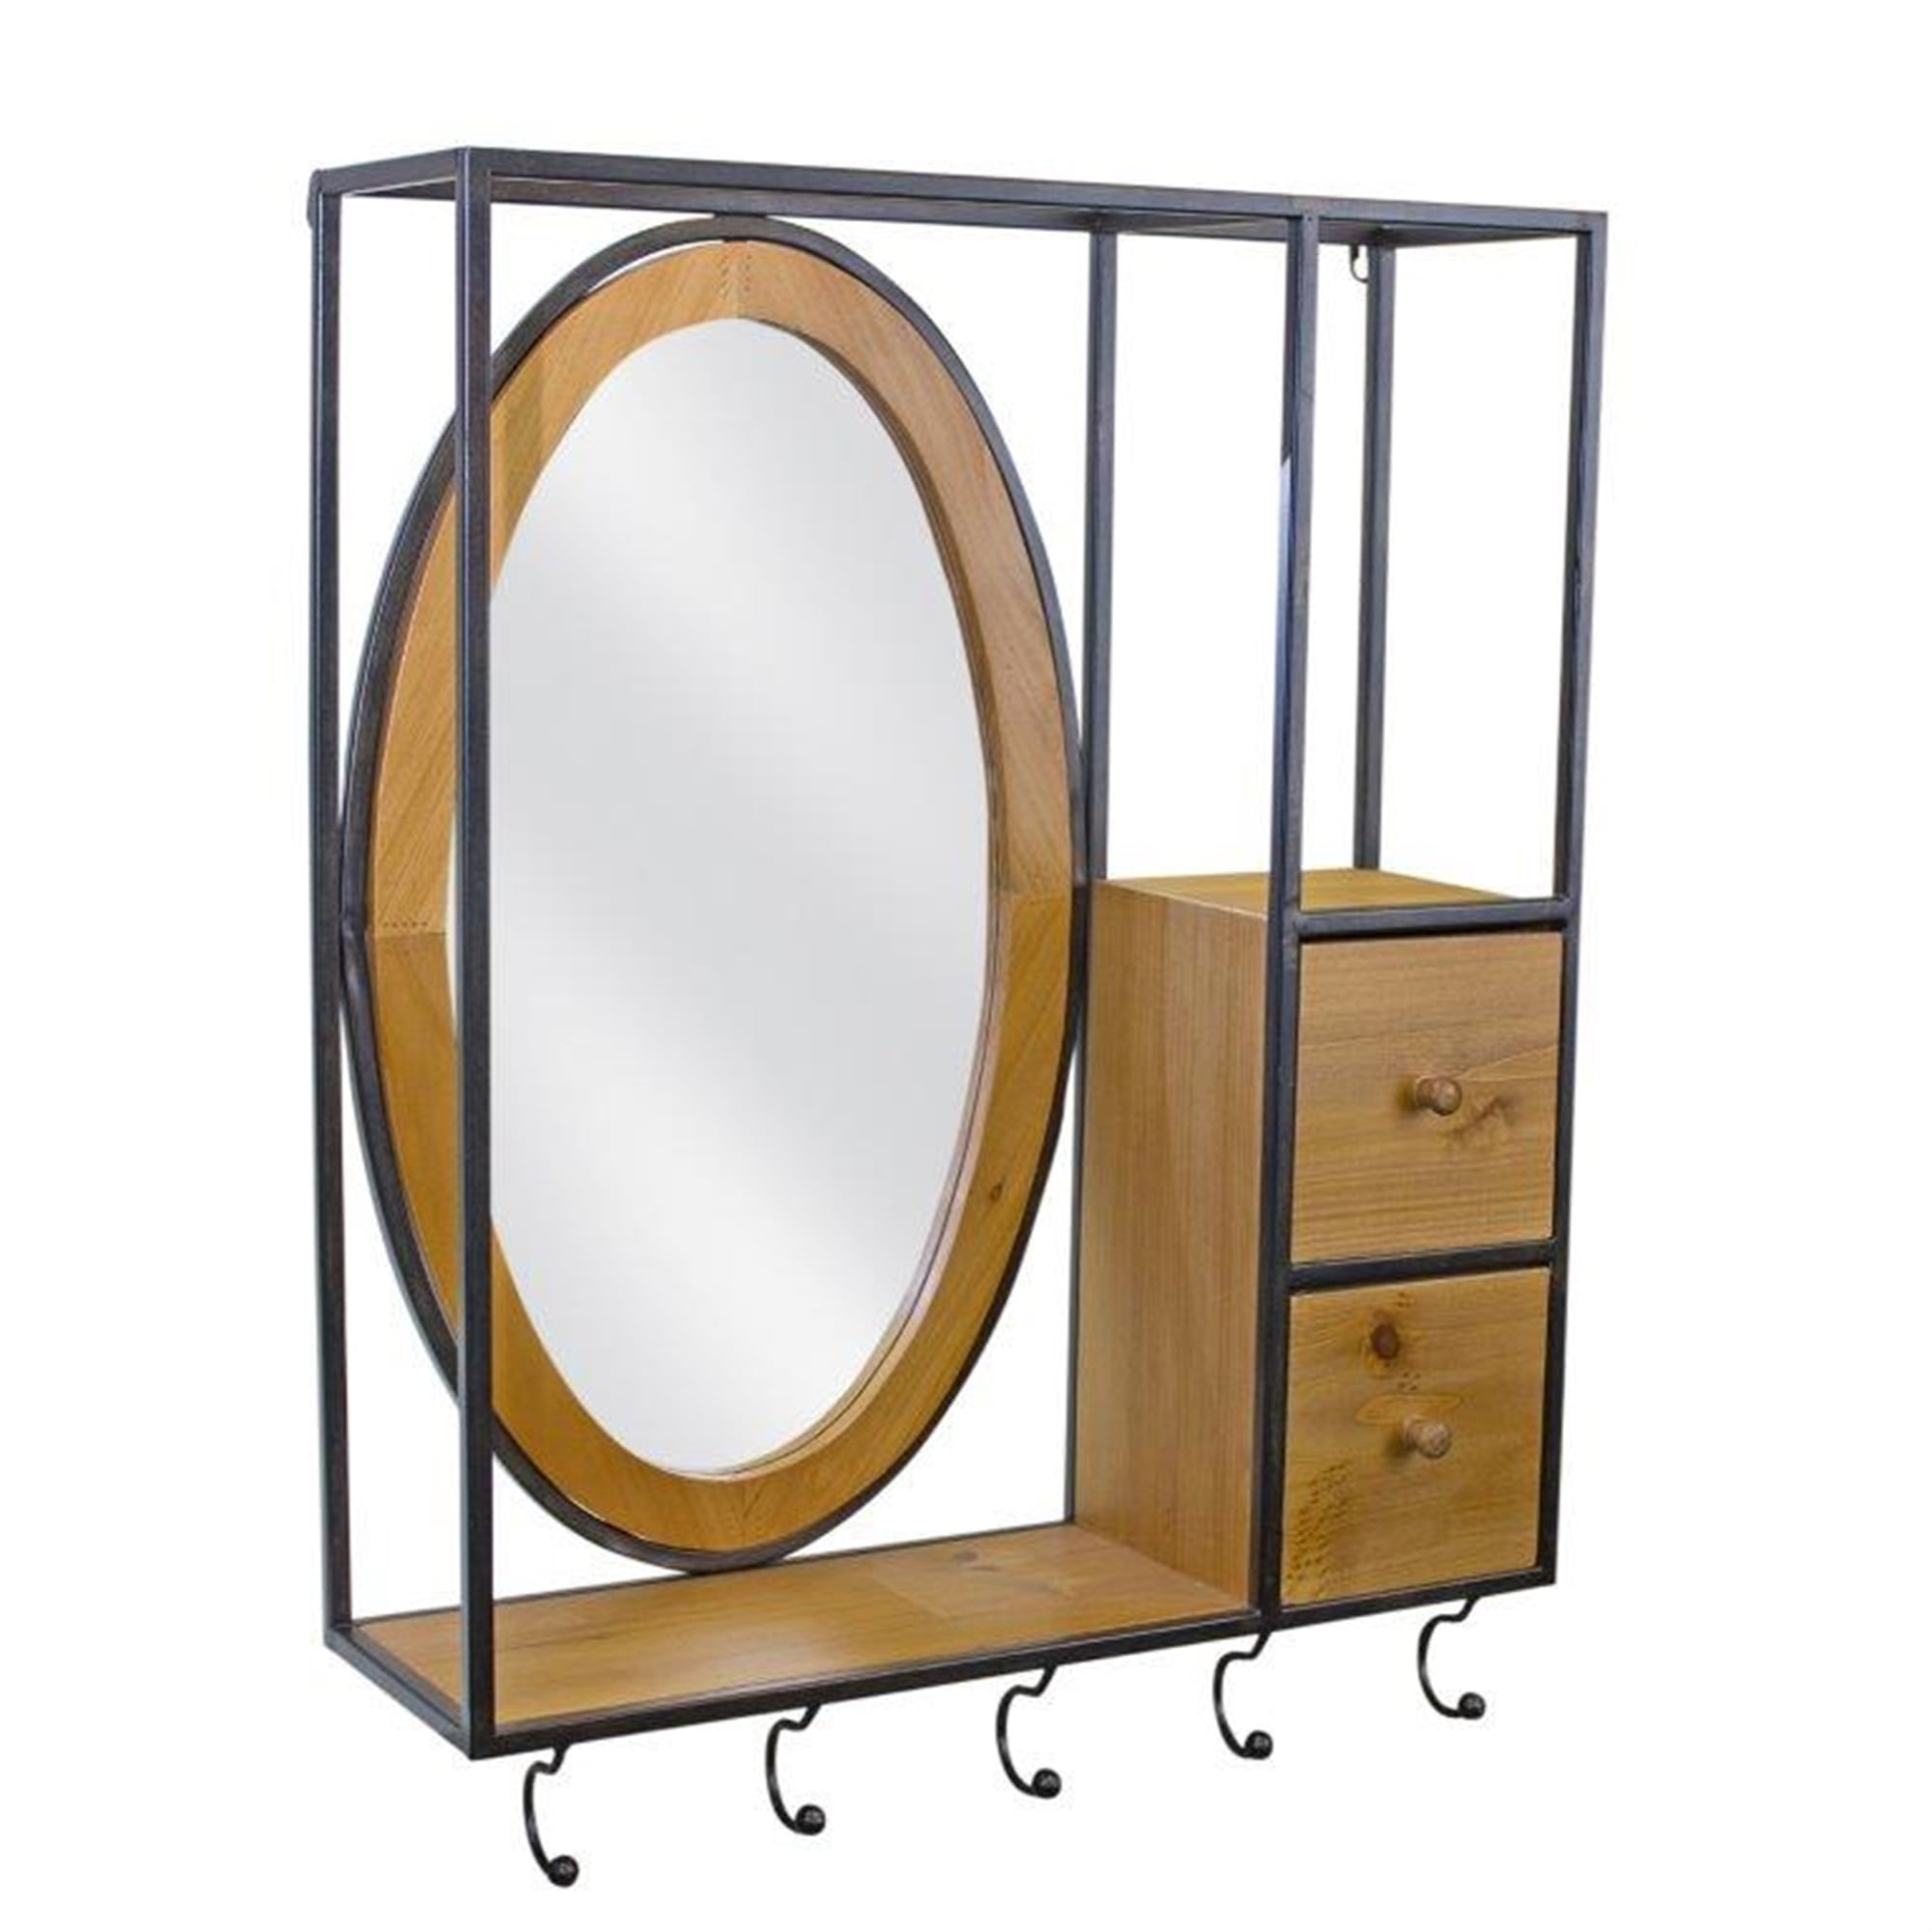 Wall Mirror with Shelf and Hooks 22.5"L x 28.75"H Iron/Wood